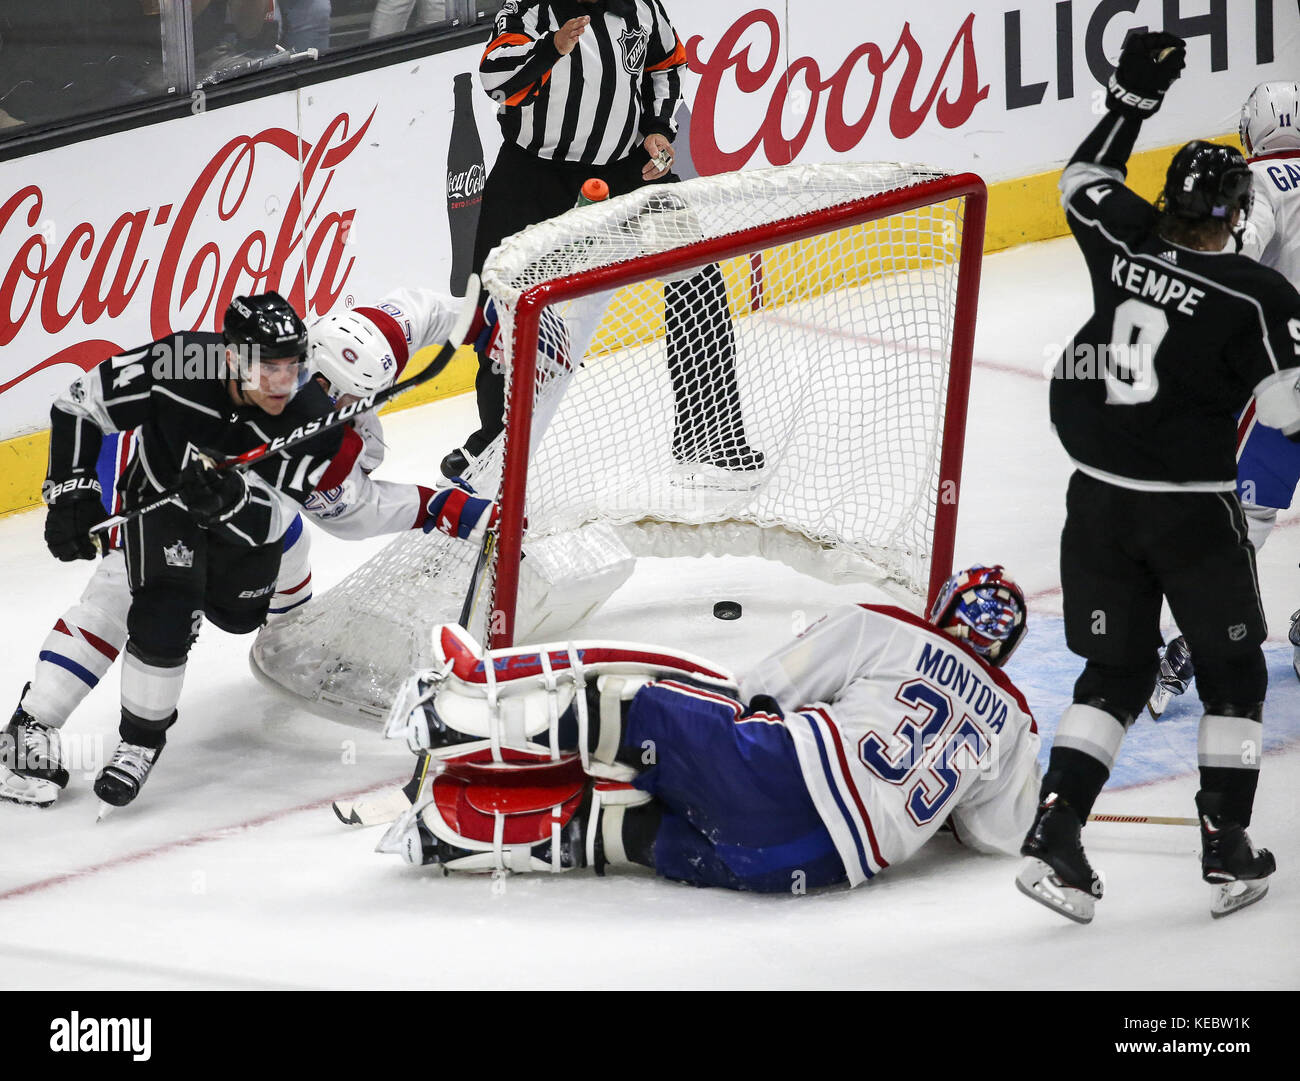 Los Angeles, California, USA. 18th Oct, 2017. Montréal Canadiens goalie Al Montoya (35) and Los Angeles Kings forward Michael Cammalleri (14) and forward Adrian Kempe (9) in actions during a 2017-2018 NHL hockey game between Los Angeles Kings and Montréal Canadiens in Los Angeles on Oct. 18, 2017. Los Angeles Kings won 5-1 Credit: Ringo Chiu/ZUMA Wire/Alamy Live News Stock Photo